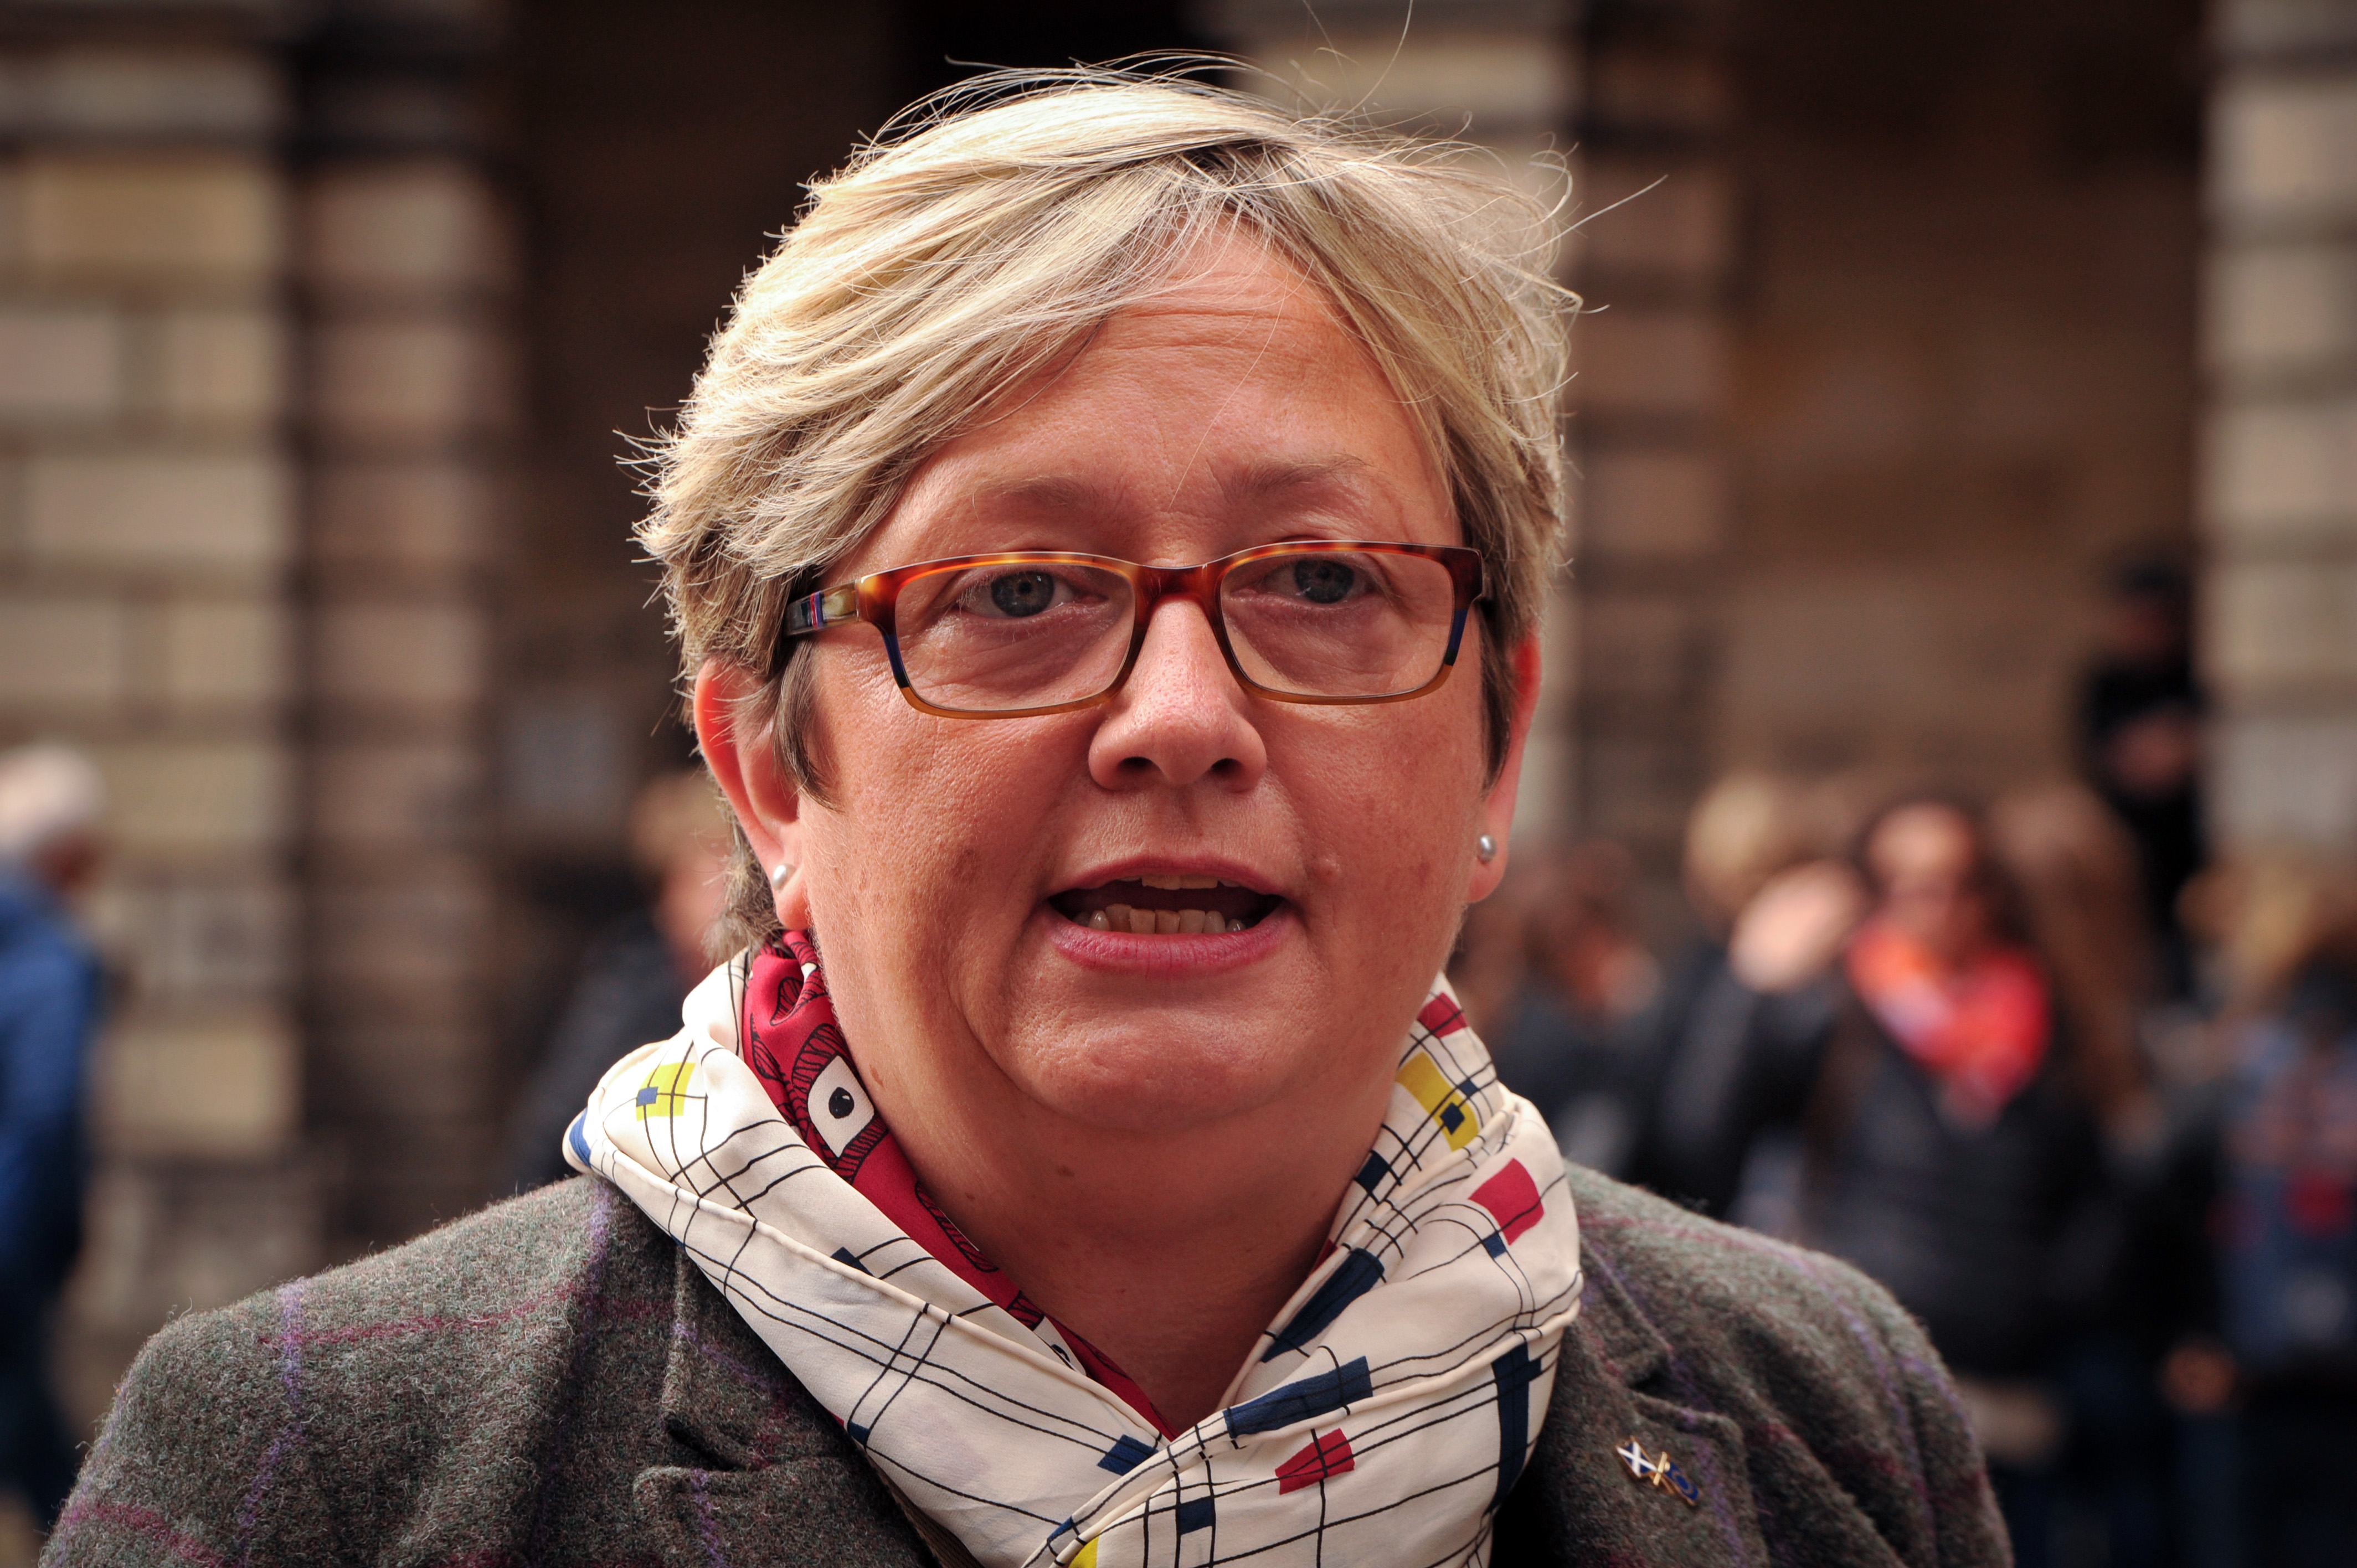 Joanna Cherry said women have 'every right to be concerned' about the Hate Crime Act.